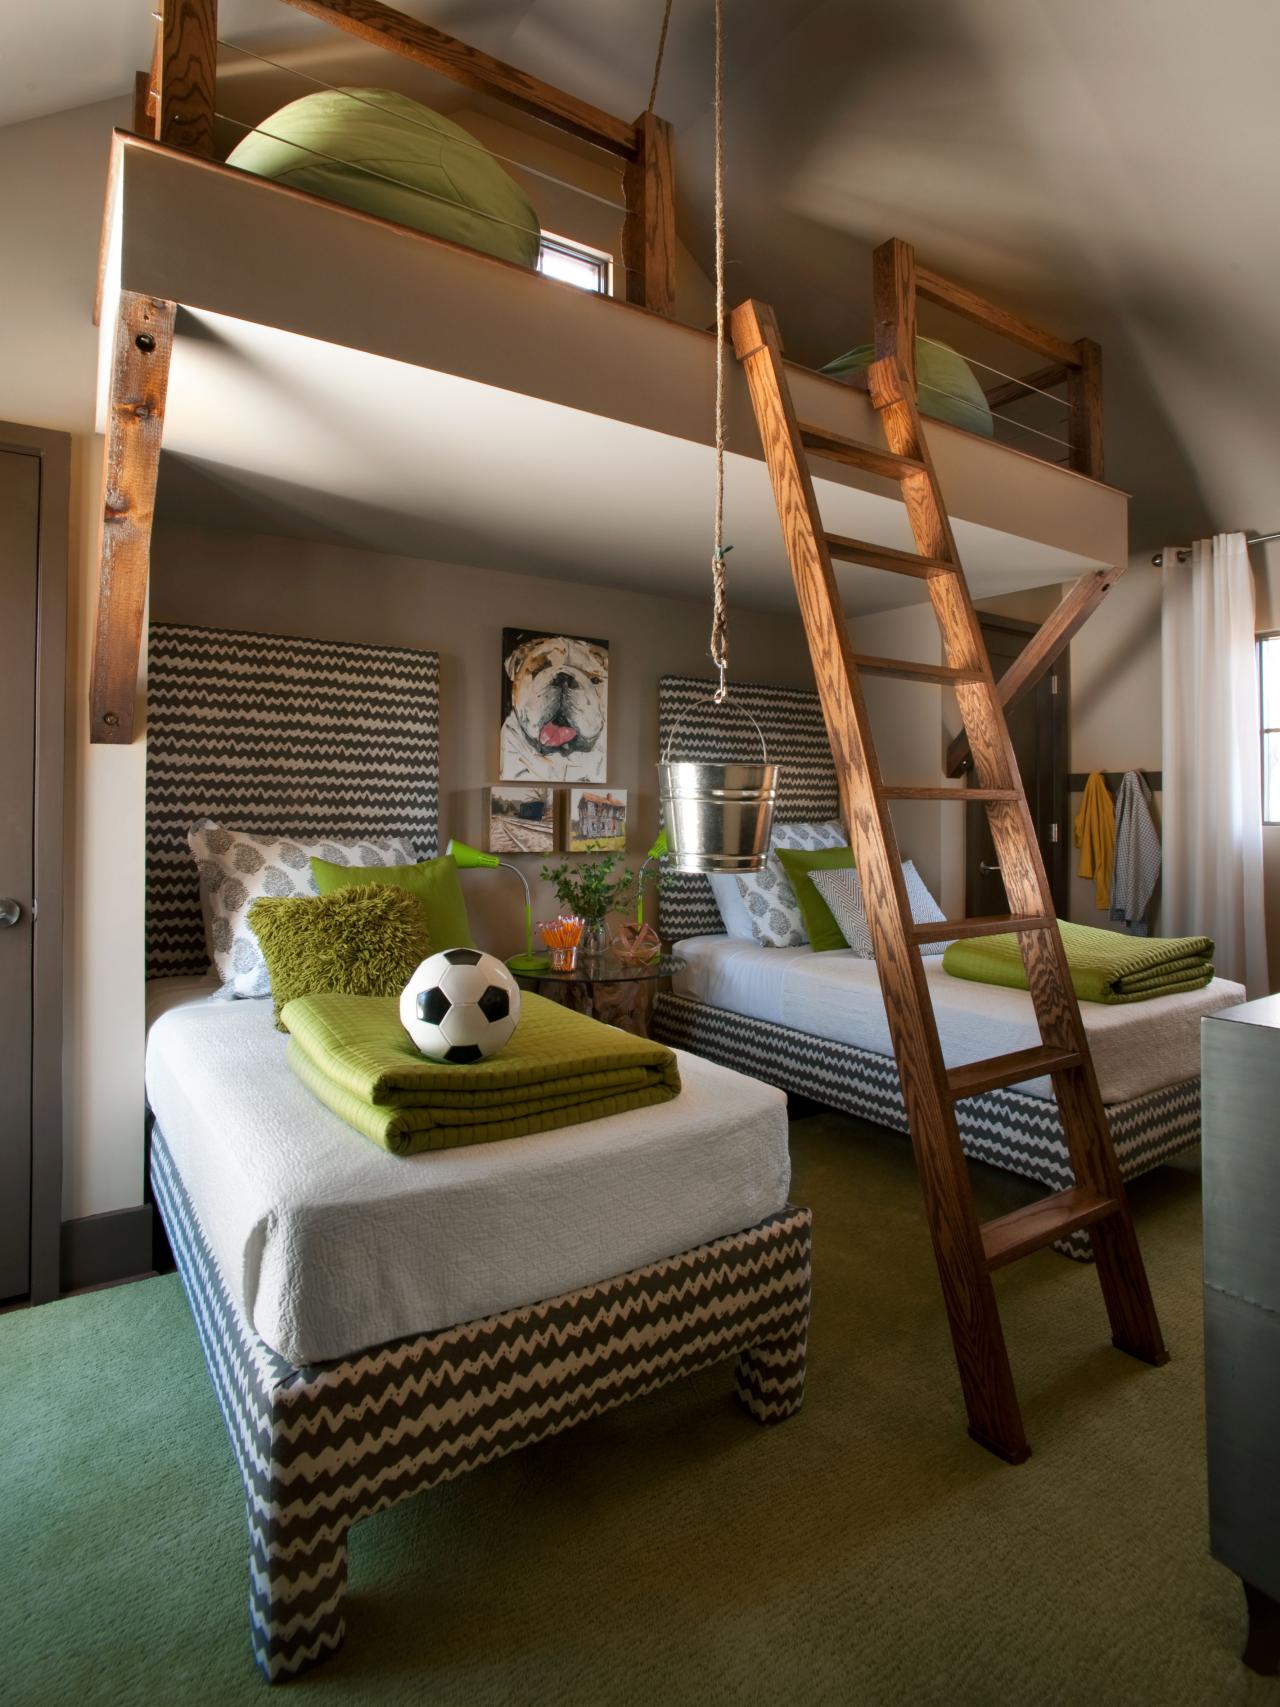 Beach Style Kids Room Design With Bunk Beds